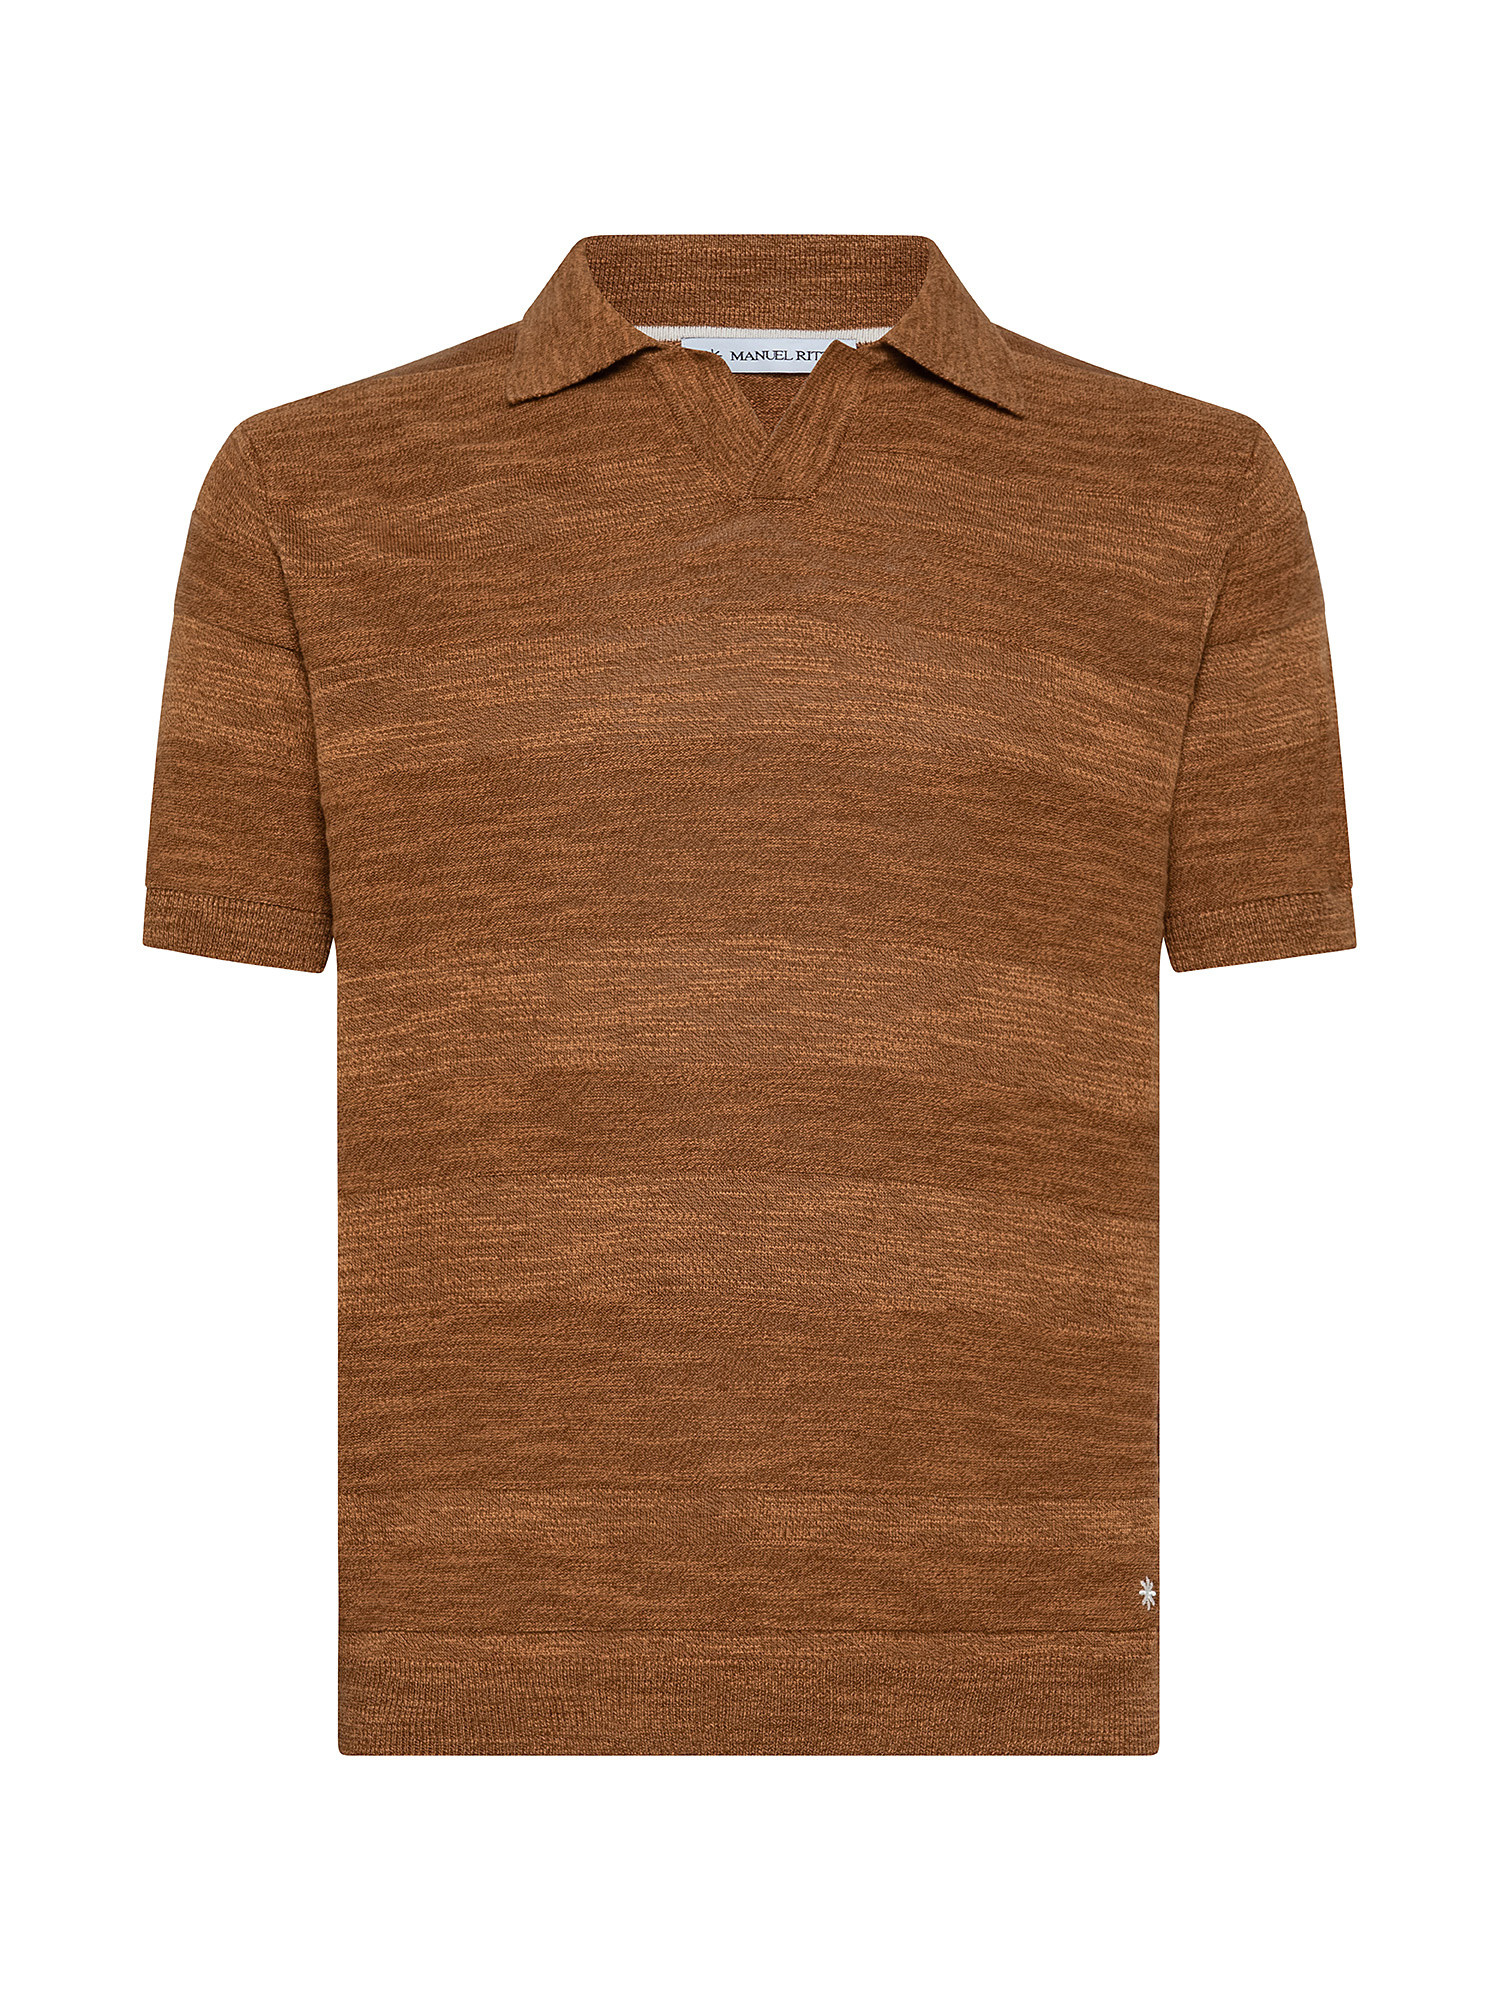 Cotton blend knitted polo shirt, Brown, large image number 0